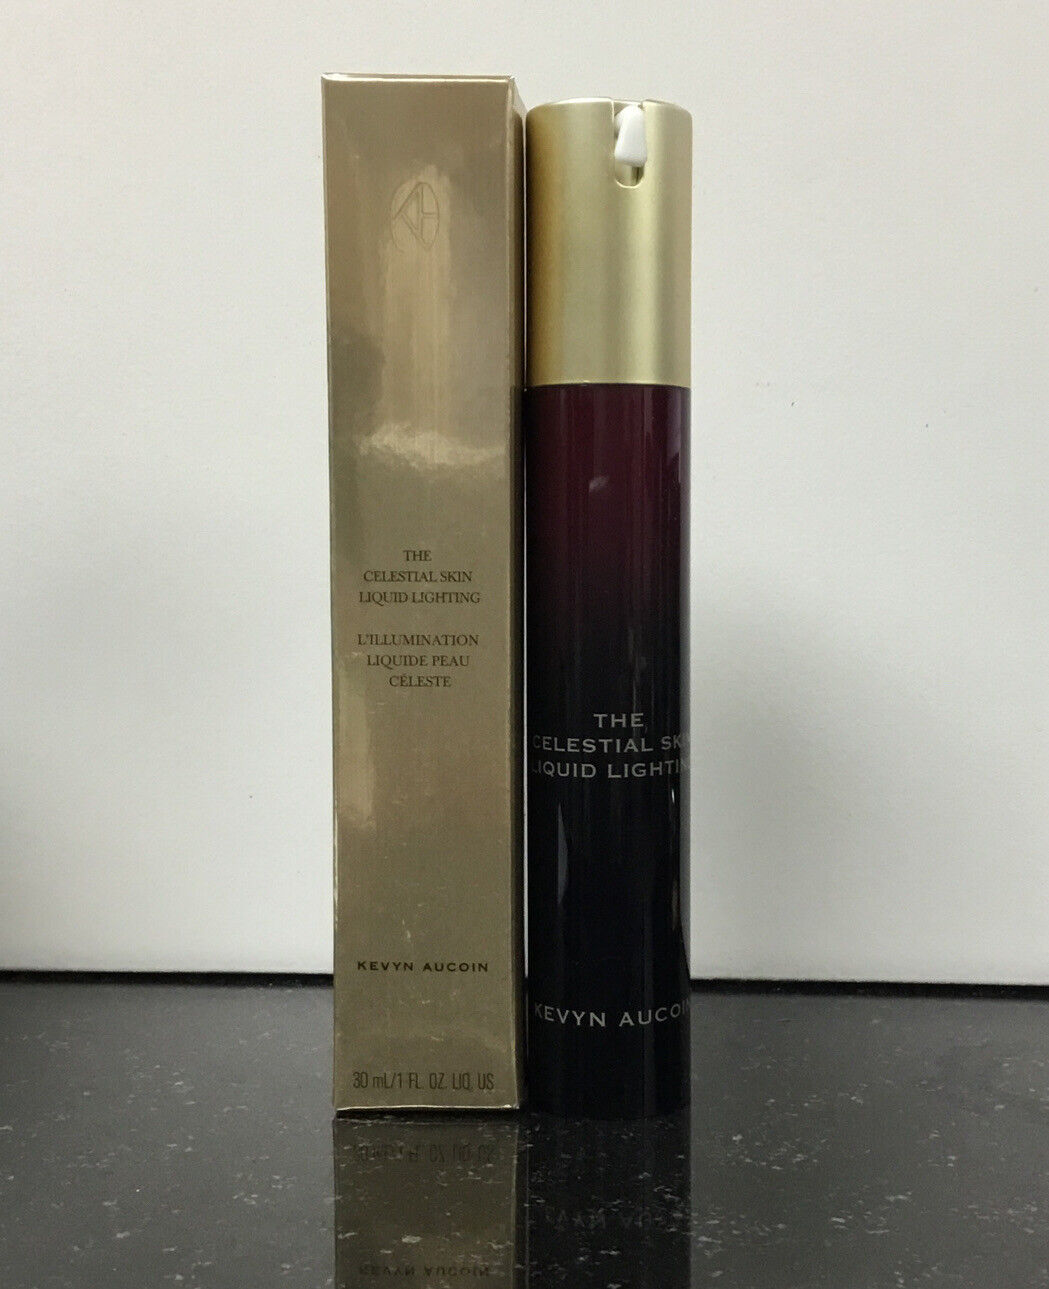 NEW IN BOX KEVYN AUCOIN THE CELESTIAL SKIN LIQUID LIGHTING - CANDLELIGHT